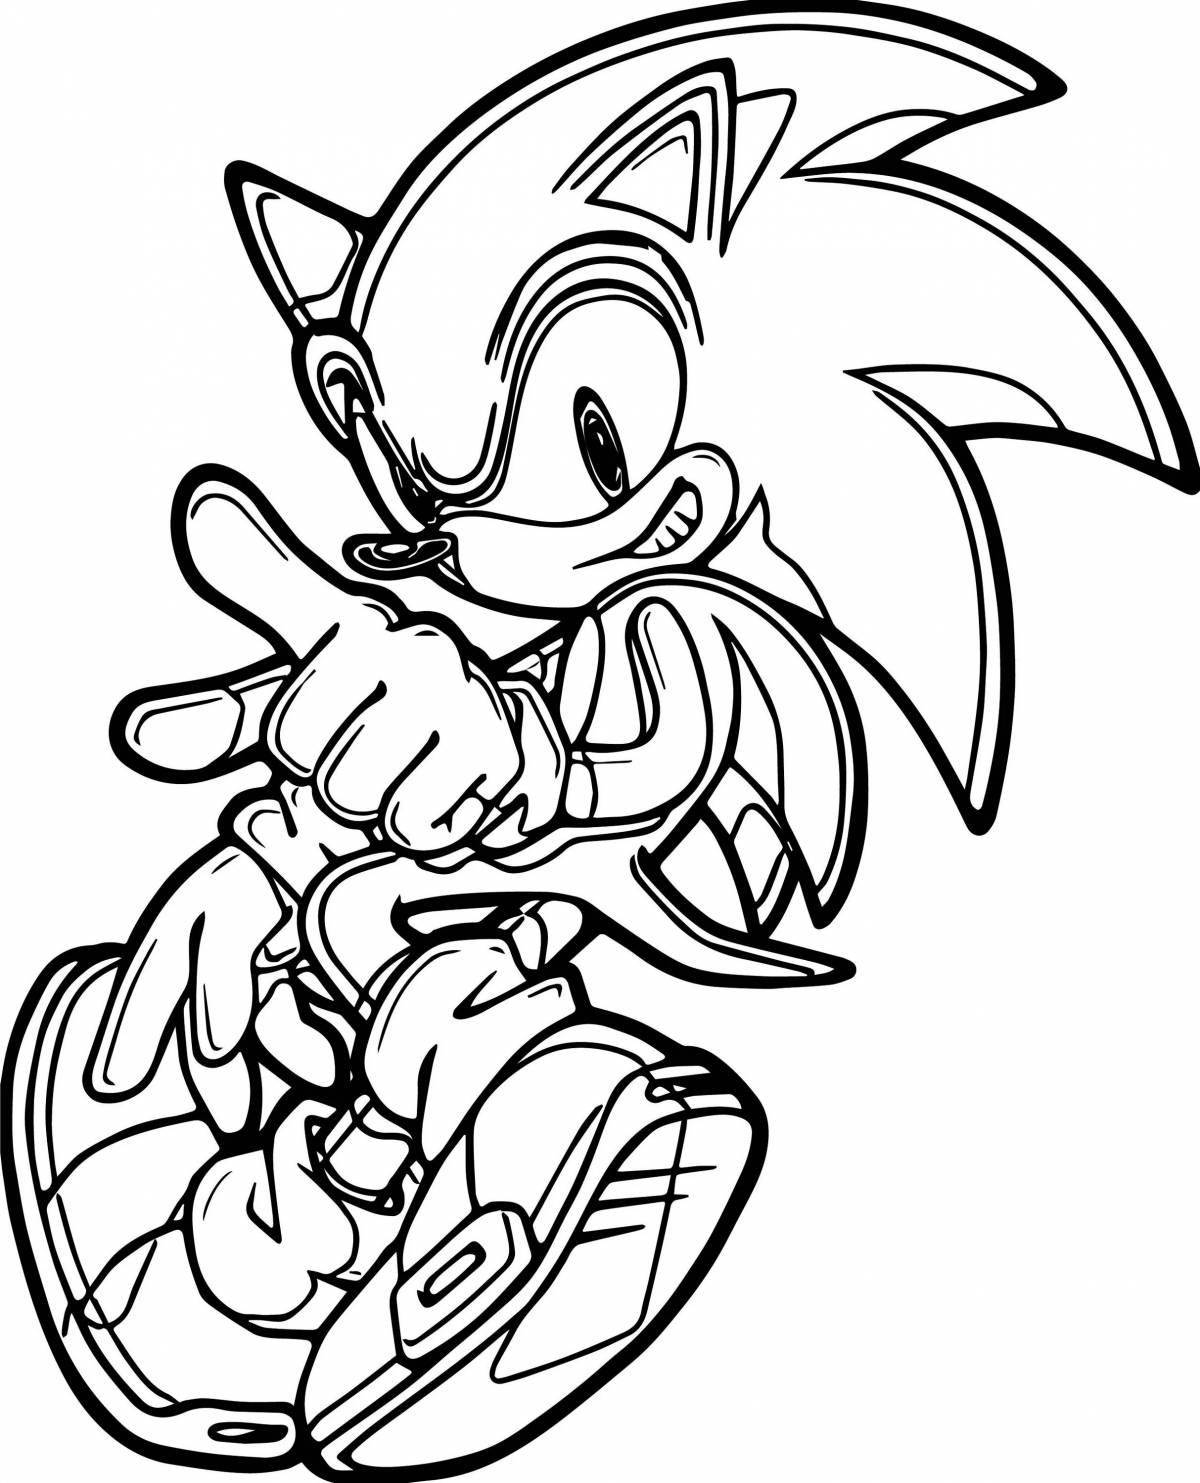 Sonic Egzy amazing coloring book